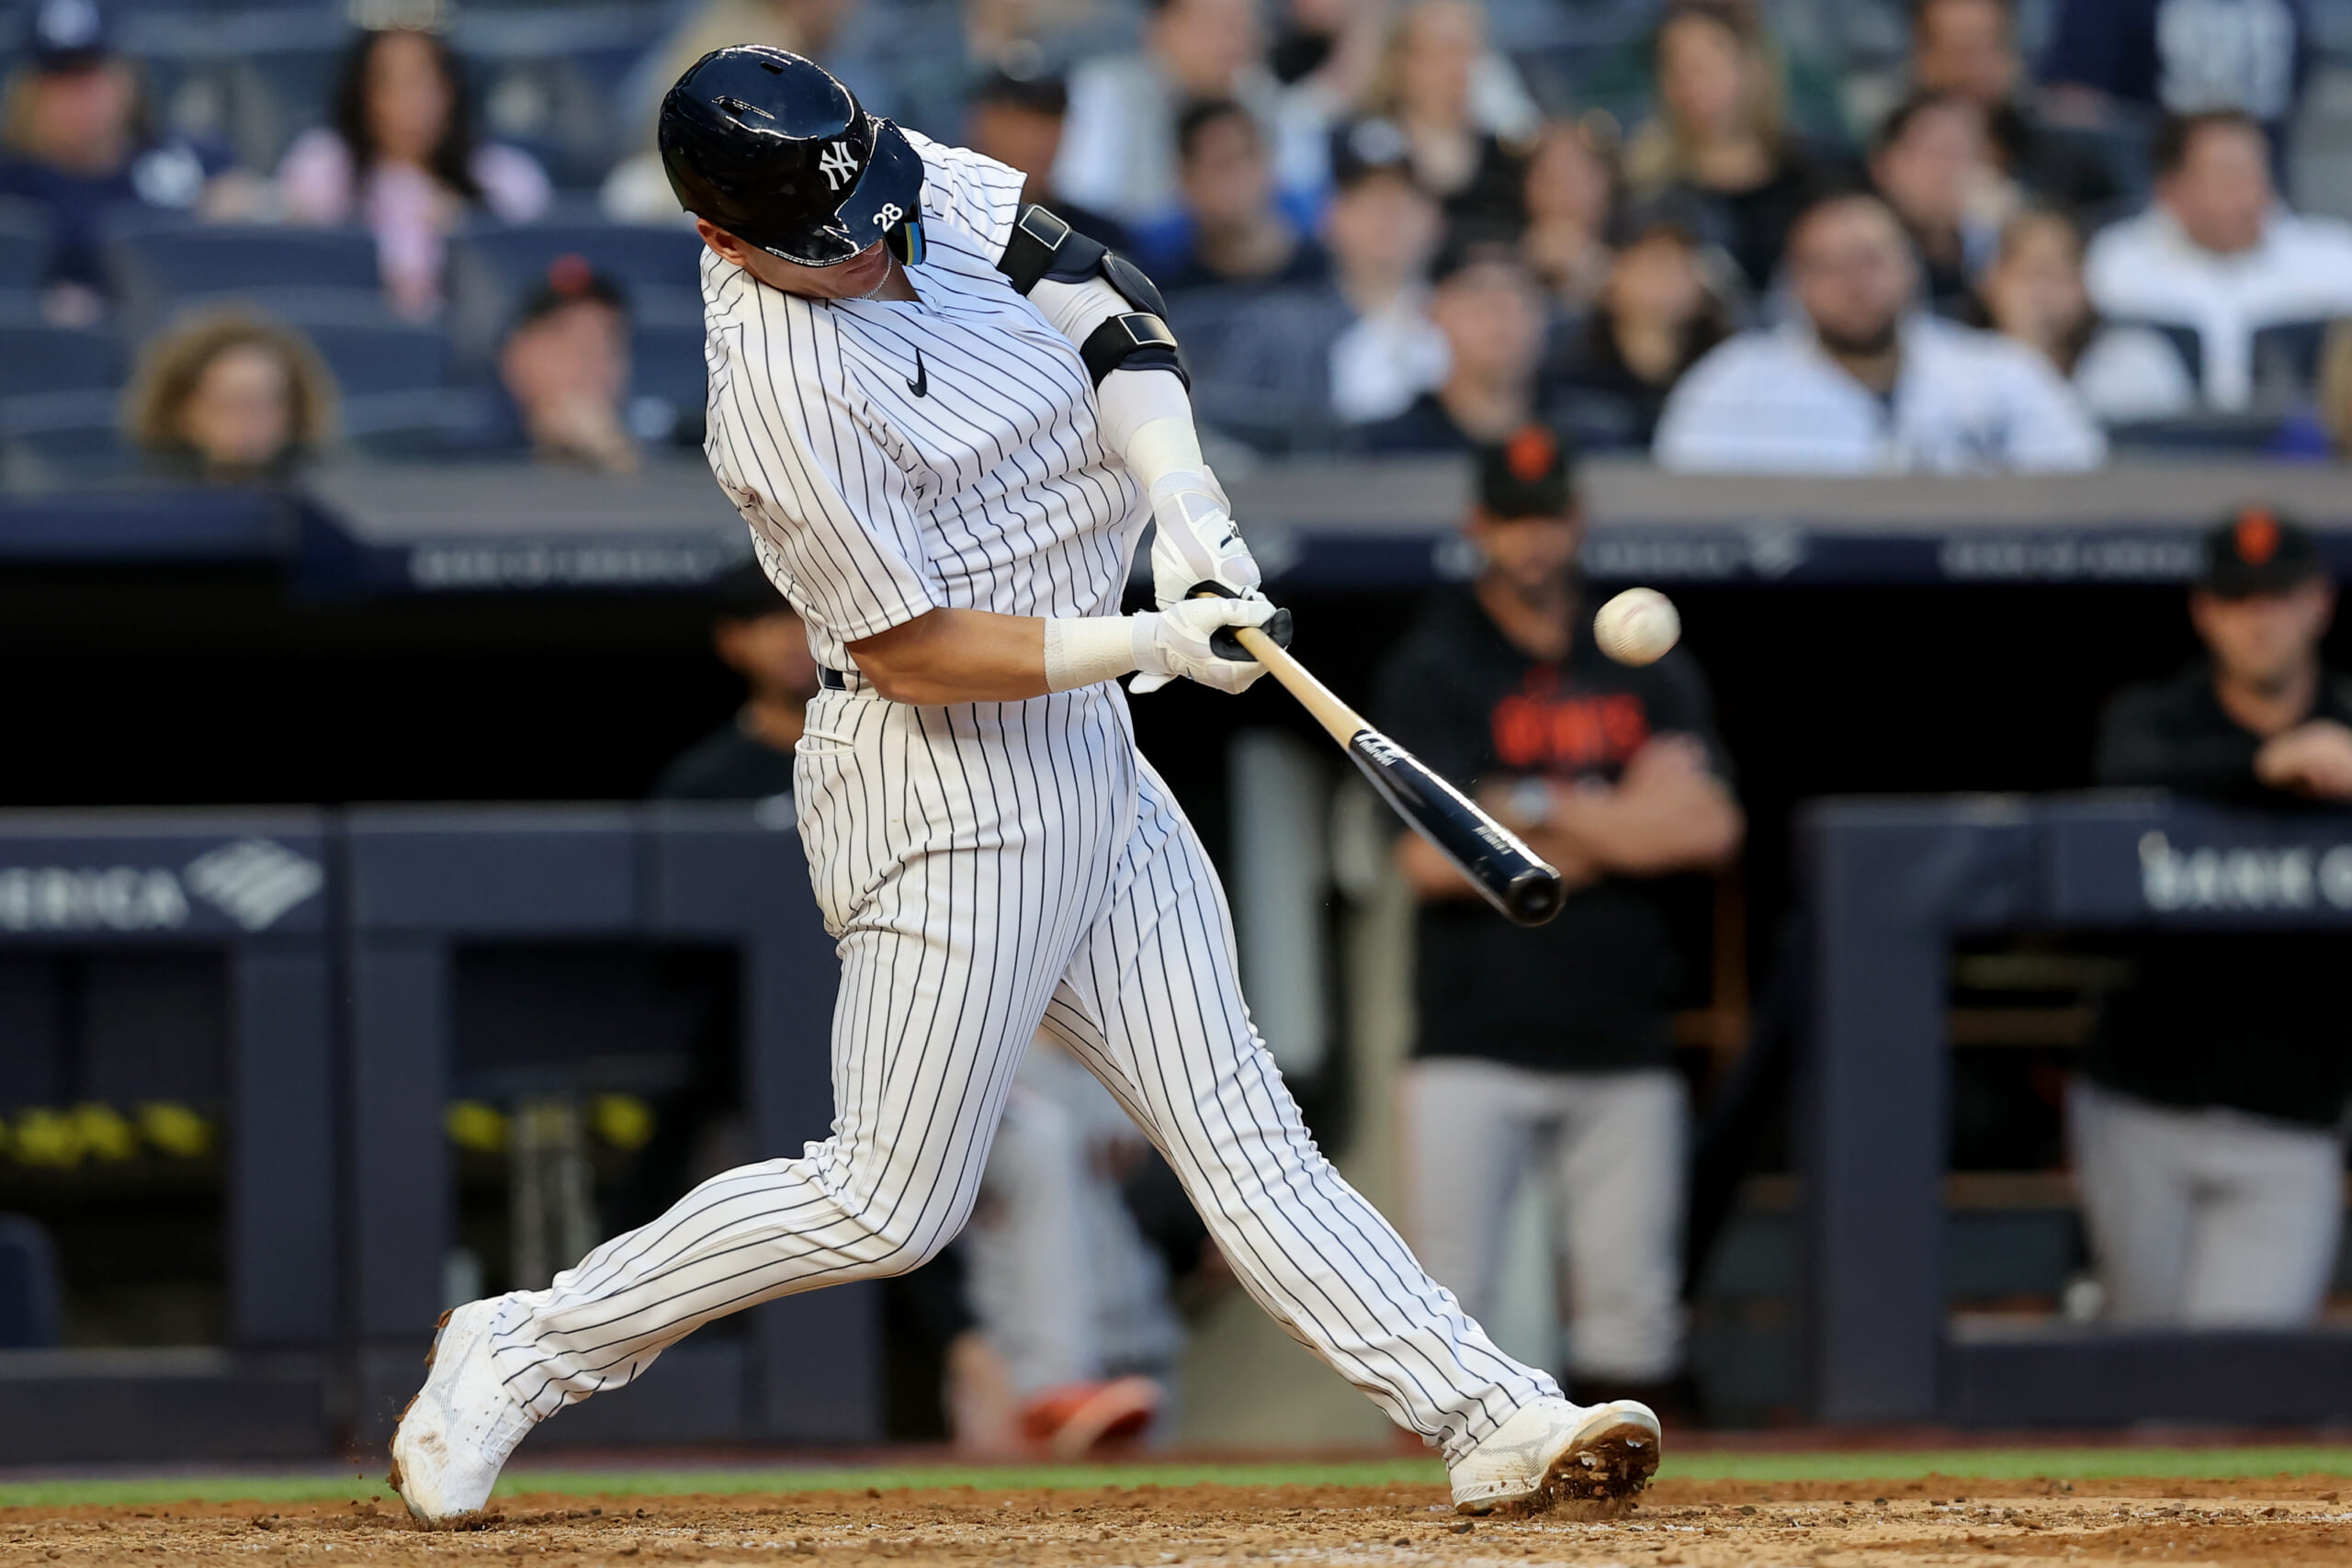 The Yankees have a fine third baseman in DJ LeMahieu over Josh